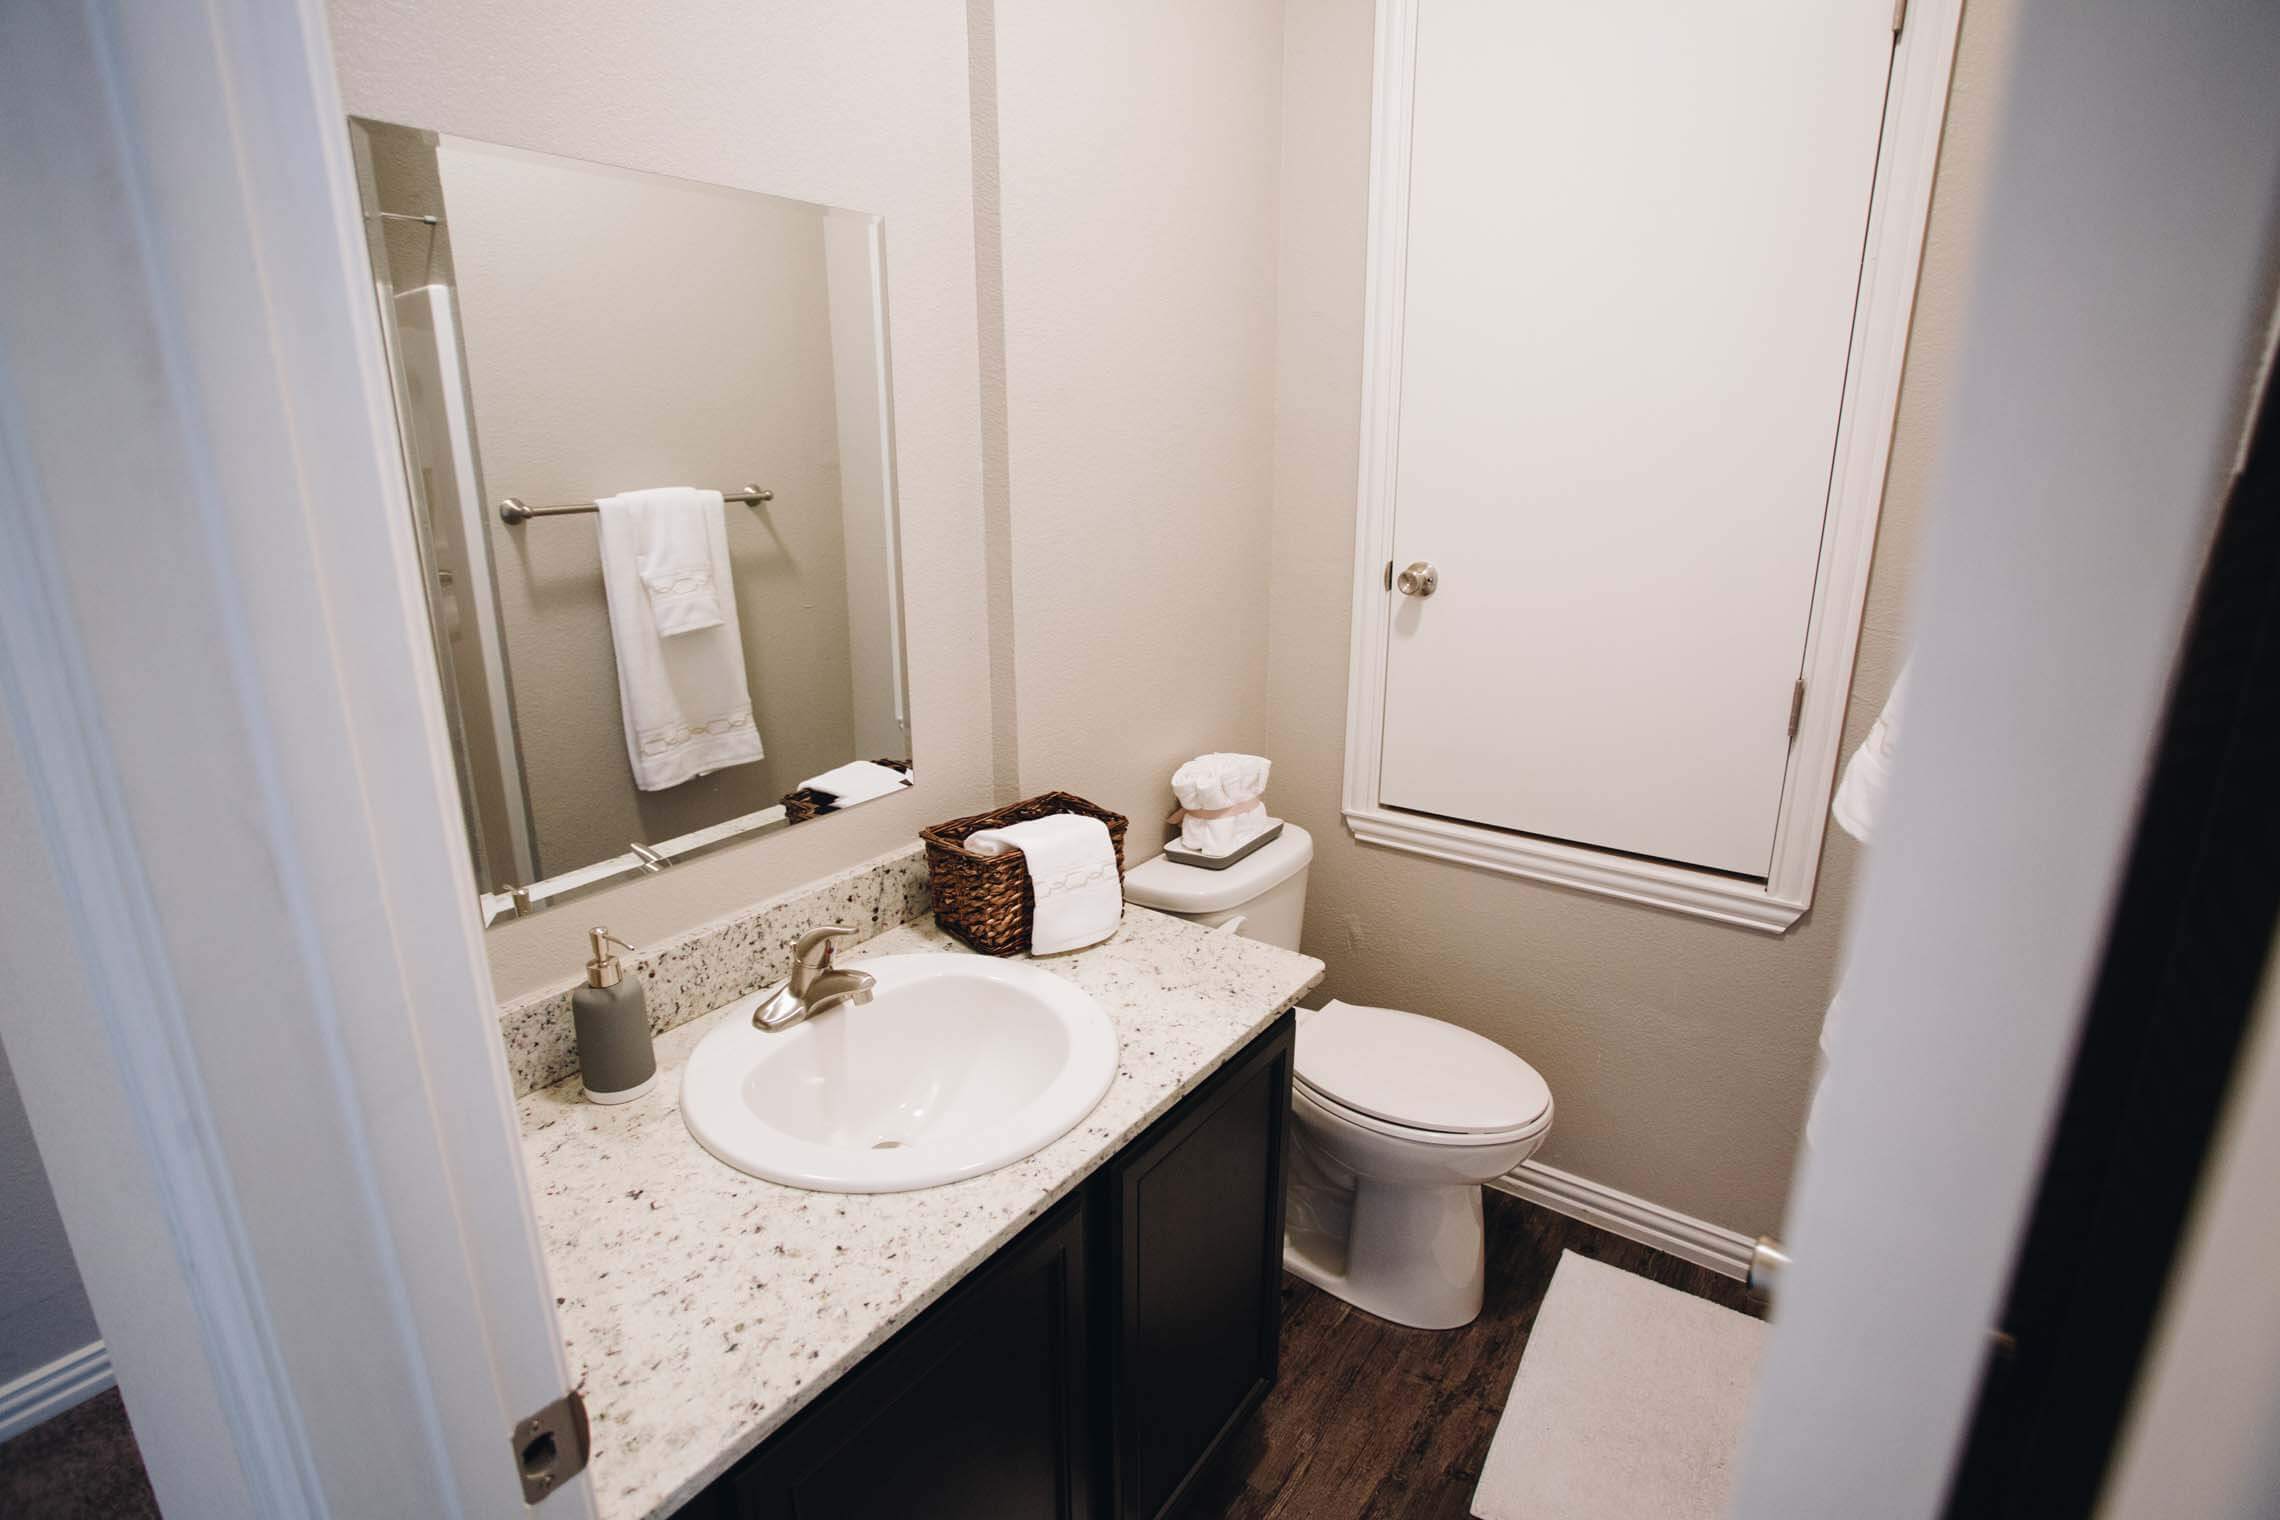 a picture of the bathroom in the aspen townhome